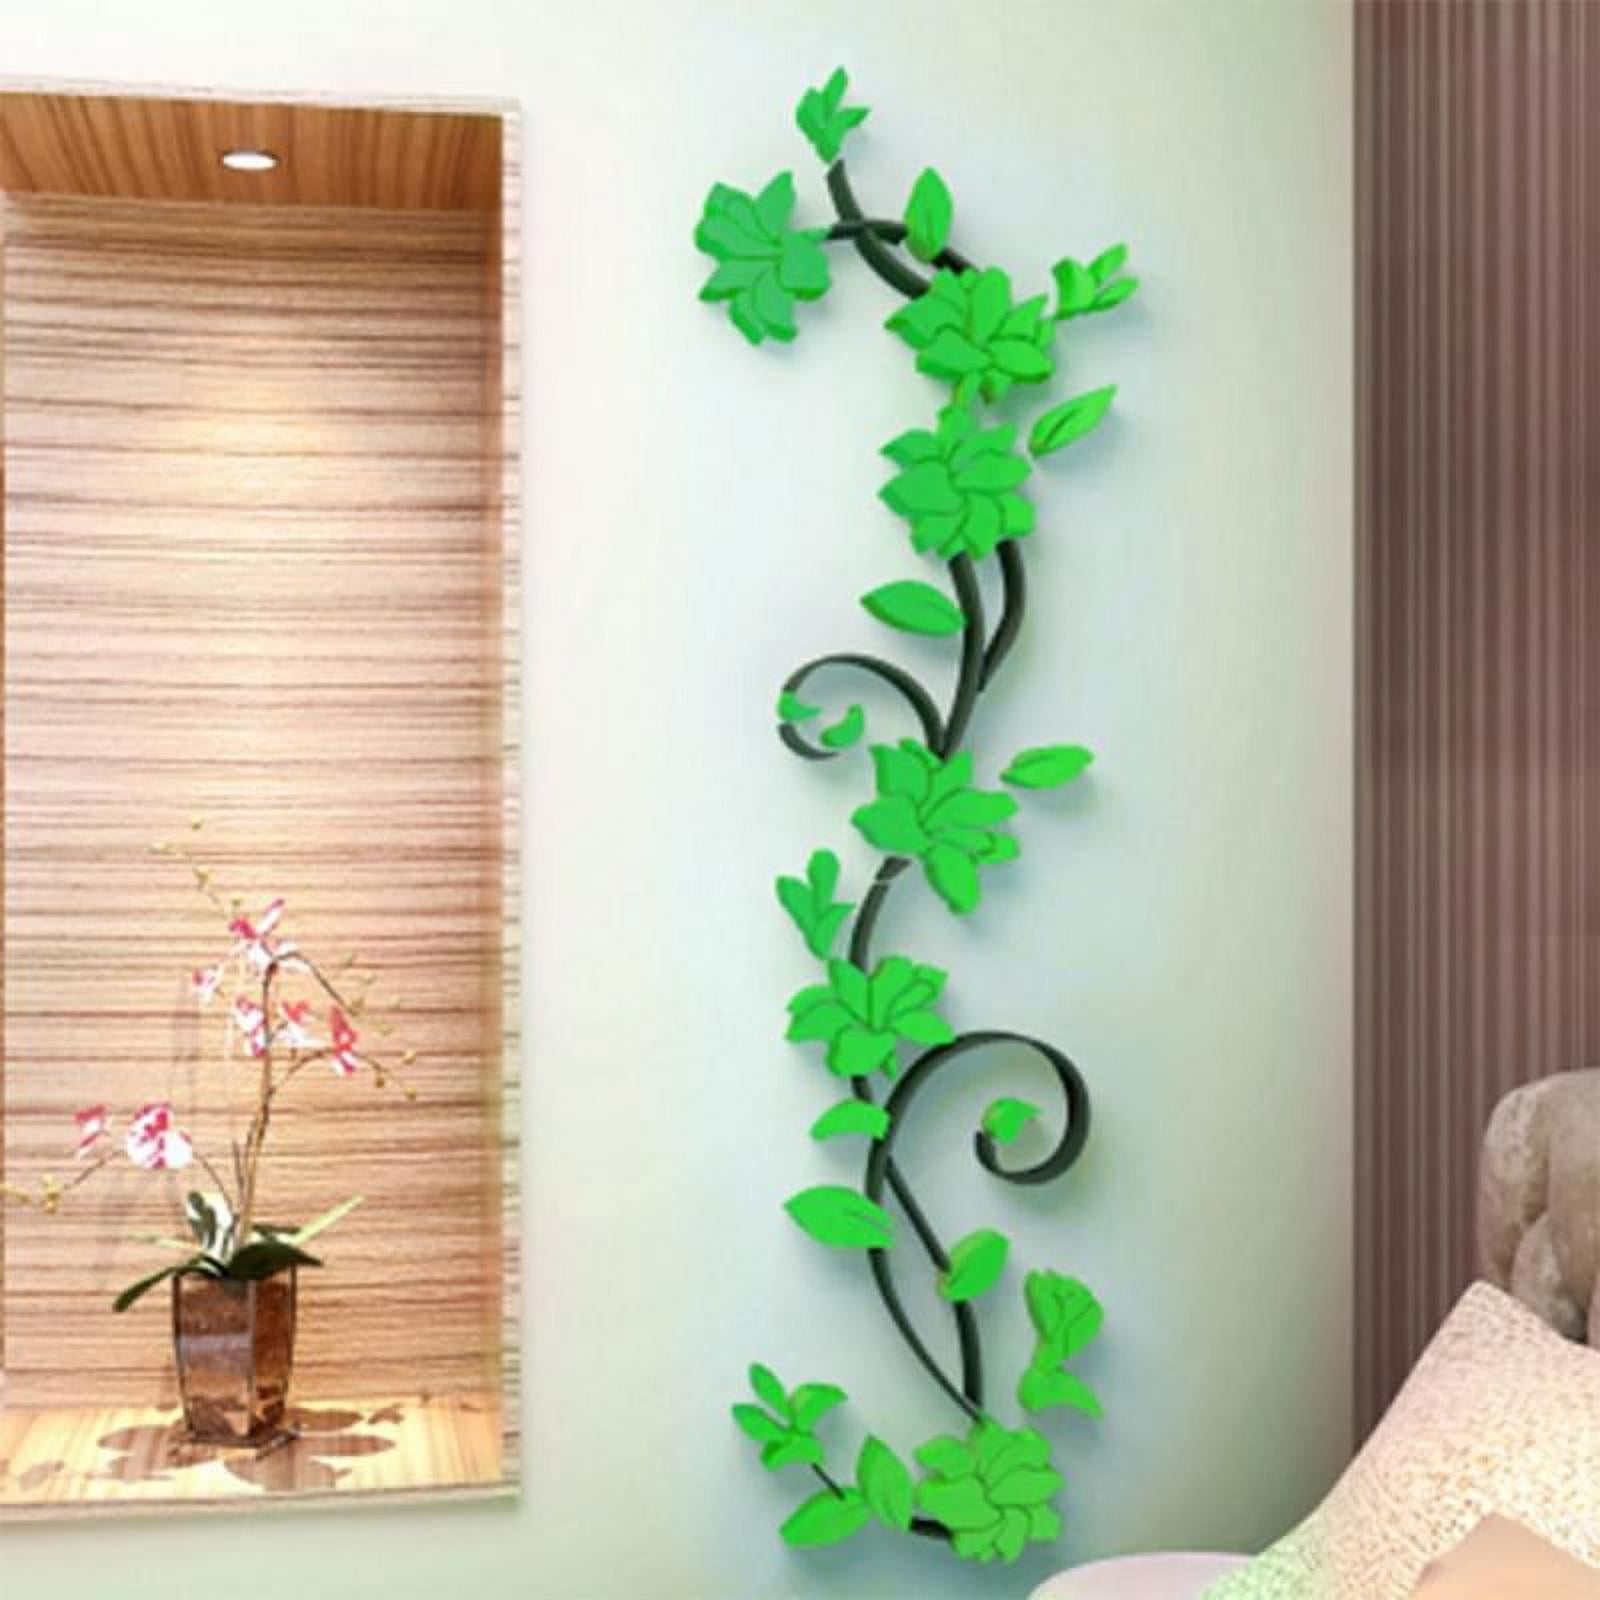 Details about   3D Mirror Removable Wall Stickers Flower Art Mural Decals Living Room Home Decor 